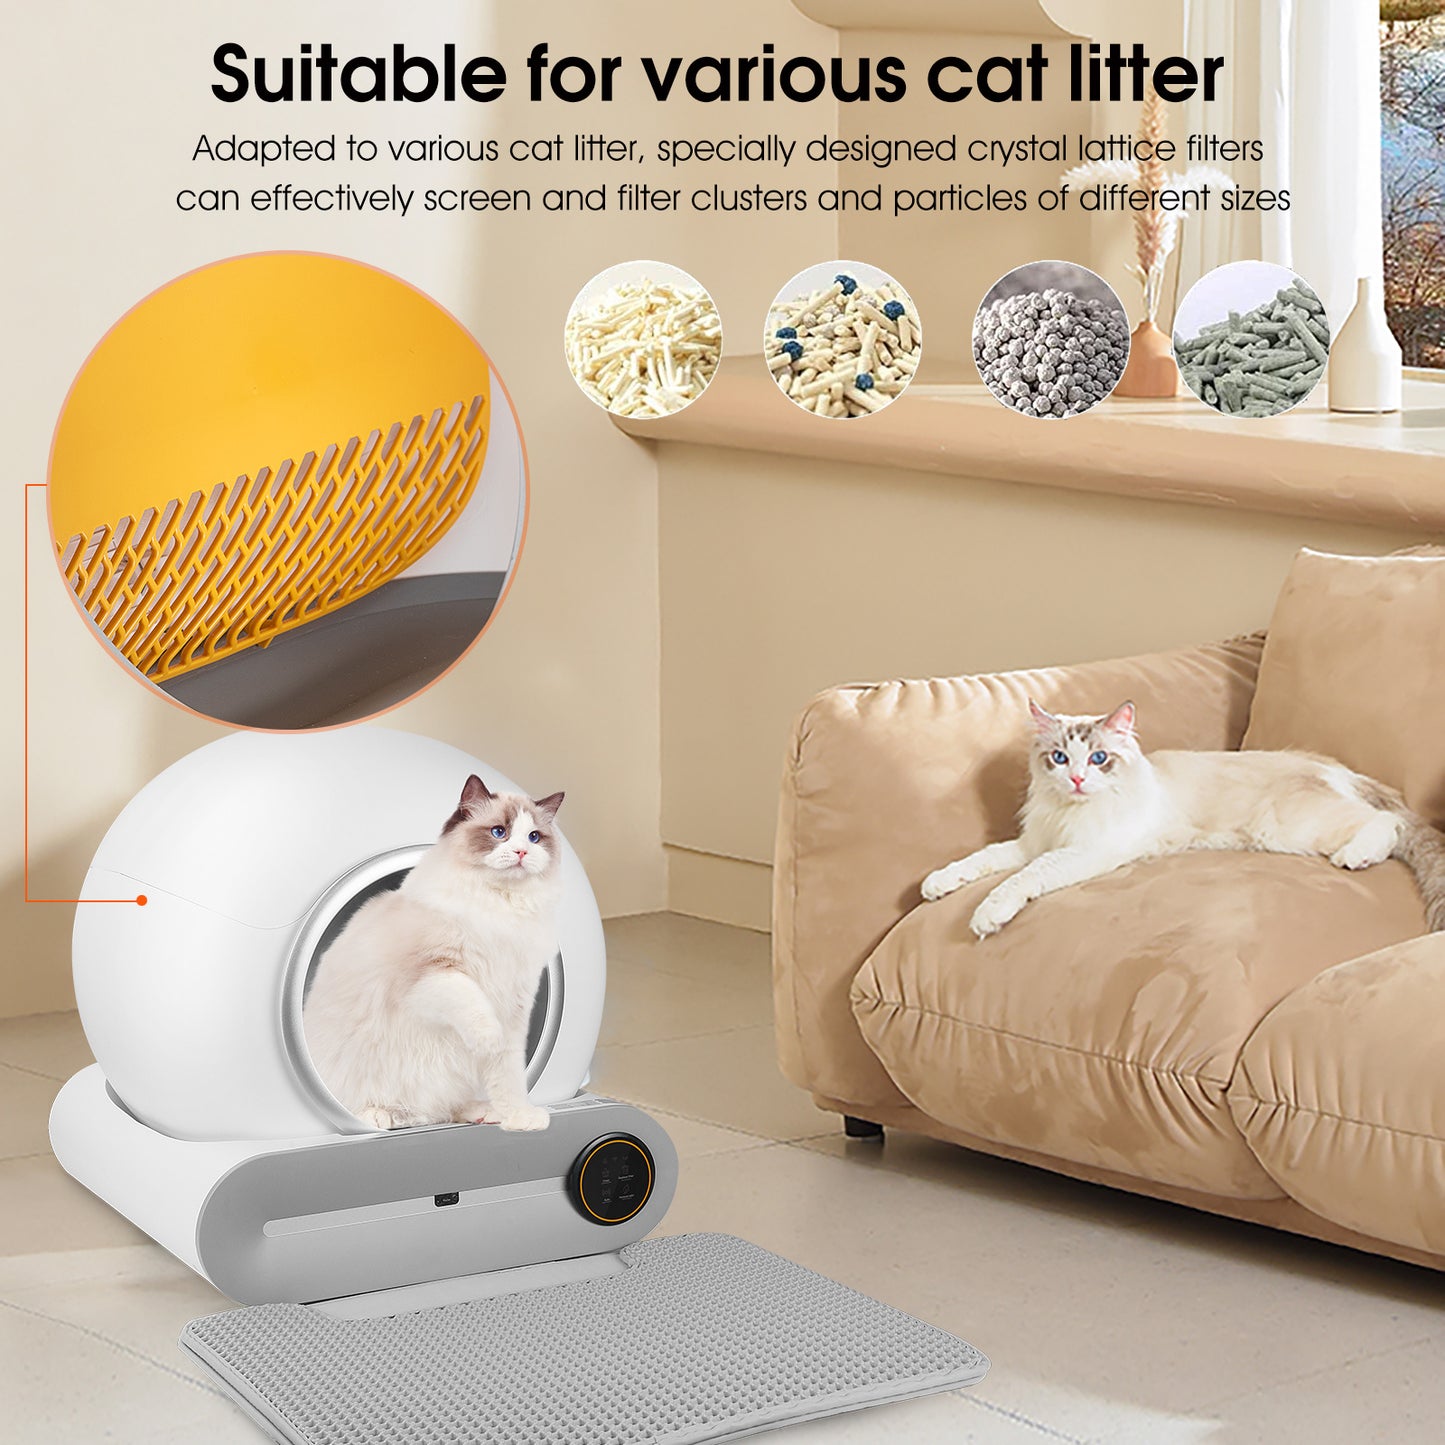 Self-Cleaning Litter Box